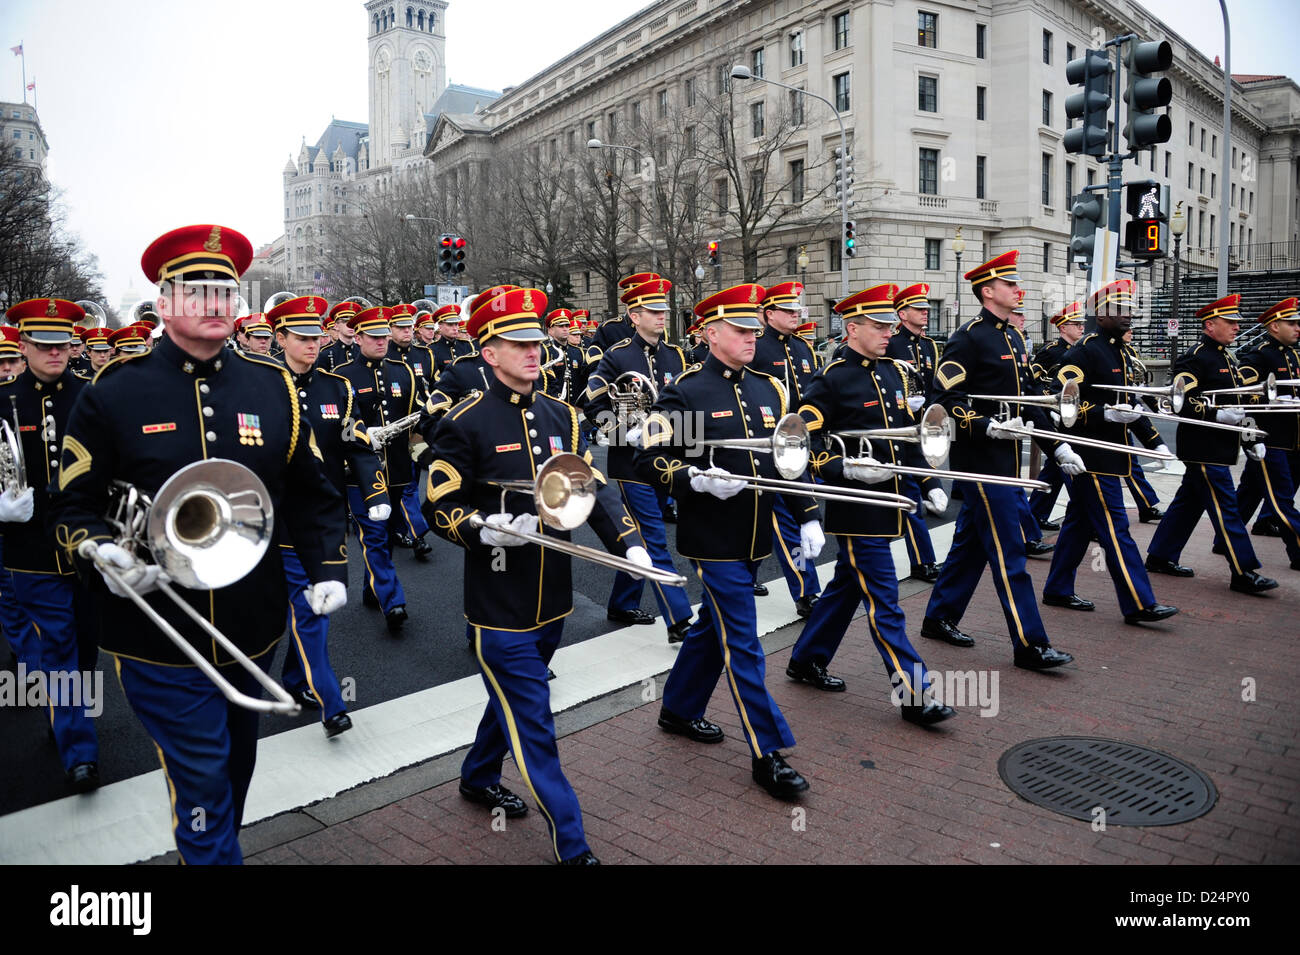 Master Sgt. William White, the U.S. Army Fife and Drum Corps' Senior Drum Major, gives movement commands to the unit during the presidential inaugural parade dress rehearsal on Pennsylvania Avenue, Jan. 13, 2013 . The soldier-musicians have been practicing for the parade, scheduled for Jan. 21, since October. Military involvement in the presidential inauguration dates back to April 30, 1789, when members of the U.S. Army, local militia units and revolutionary war veterans escorted George Washington to his first inauguration ceremony. (DoD Photo by Sgt. Katryn Tuton) (Released) Stock Photo